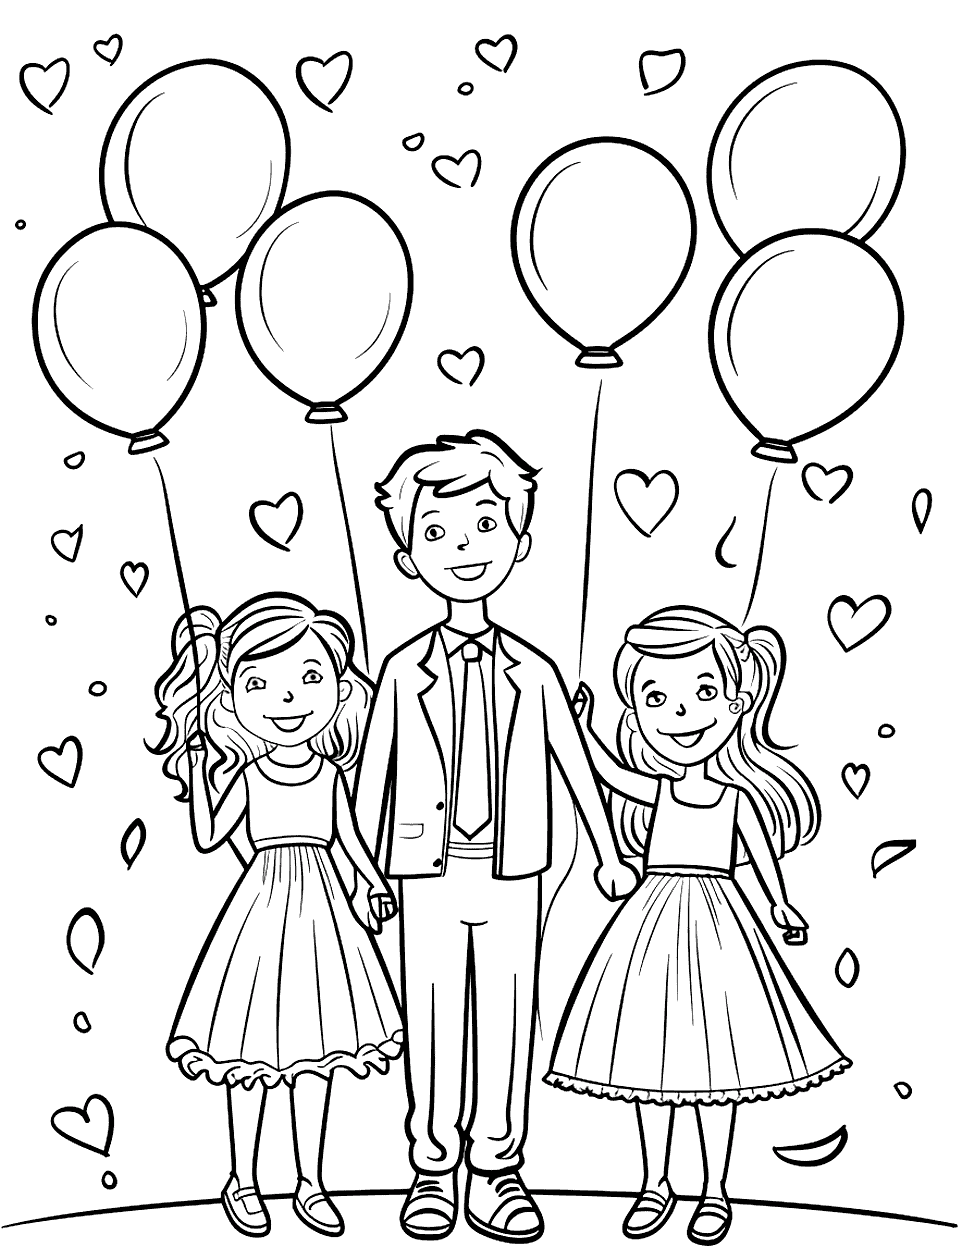 Balloon Release Celebration Wedding Coloring Page - Kids releasing balloons into the sky at a wedding reception.